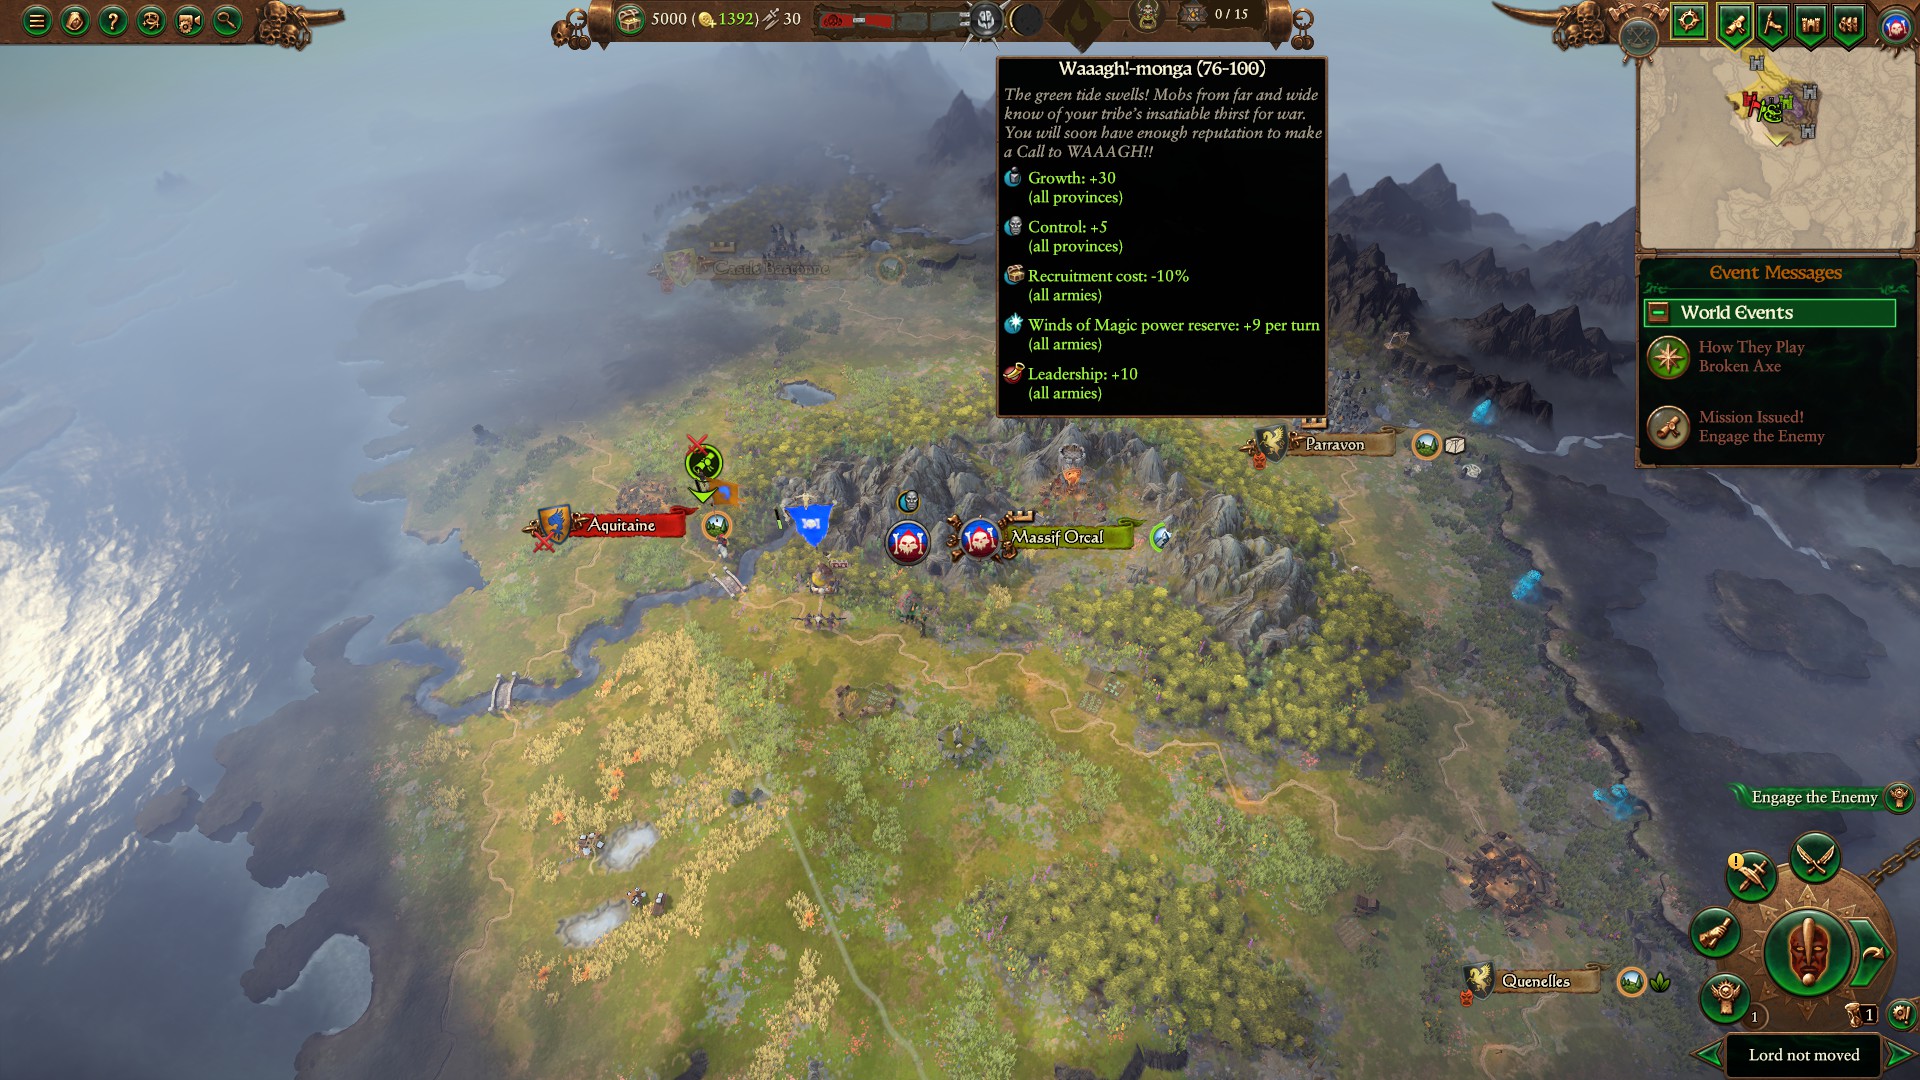 Total War: Warhammer 3 Immortal Empires Grom the Paunch Greenskins campaign overview, guide and second thoughts image 3